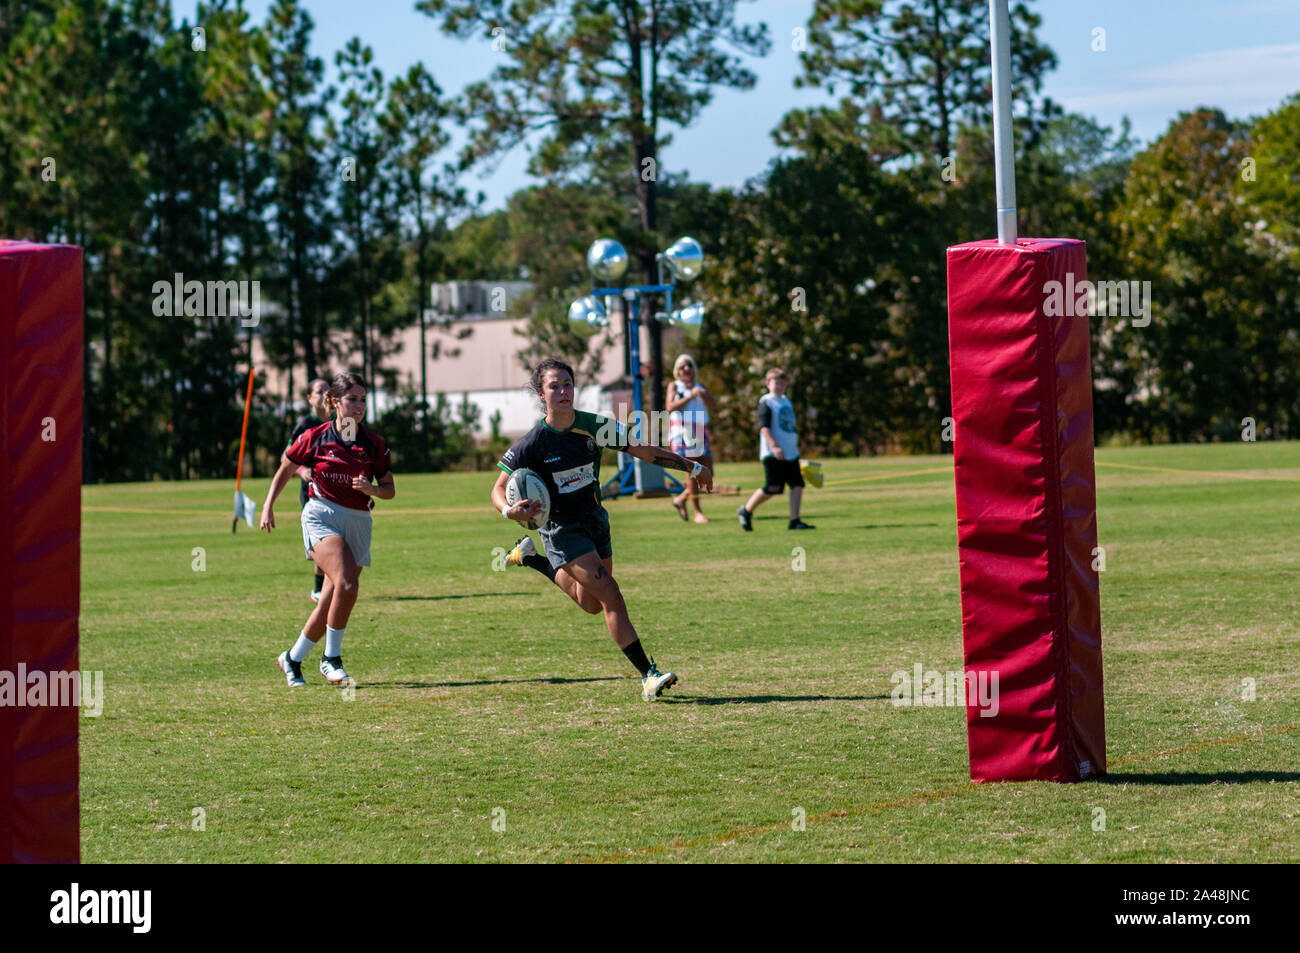 Southern Pines, North Carolina, USA. 12th Oct, 2019. Oct. 12, 2019 - Southern Pines, N.C., USA - Carolinas Geographic Rugby Union women's rugby action between the Southern Pines 'The Celts' and Camp Lejeune Maniacks at the National Athletic Village. Southern Pines defeated Camp Lejeune, 39-0, for the team's first-ever Carolina Geographic Rugby Union matrix win. Credit: Timothy L. Hale/ZUMA Wire/Alamy Live News Stock Photo